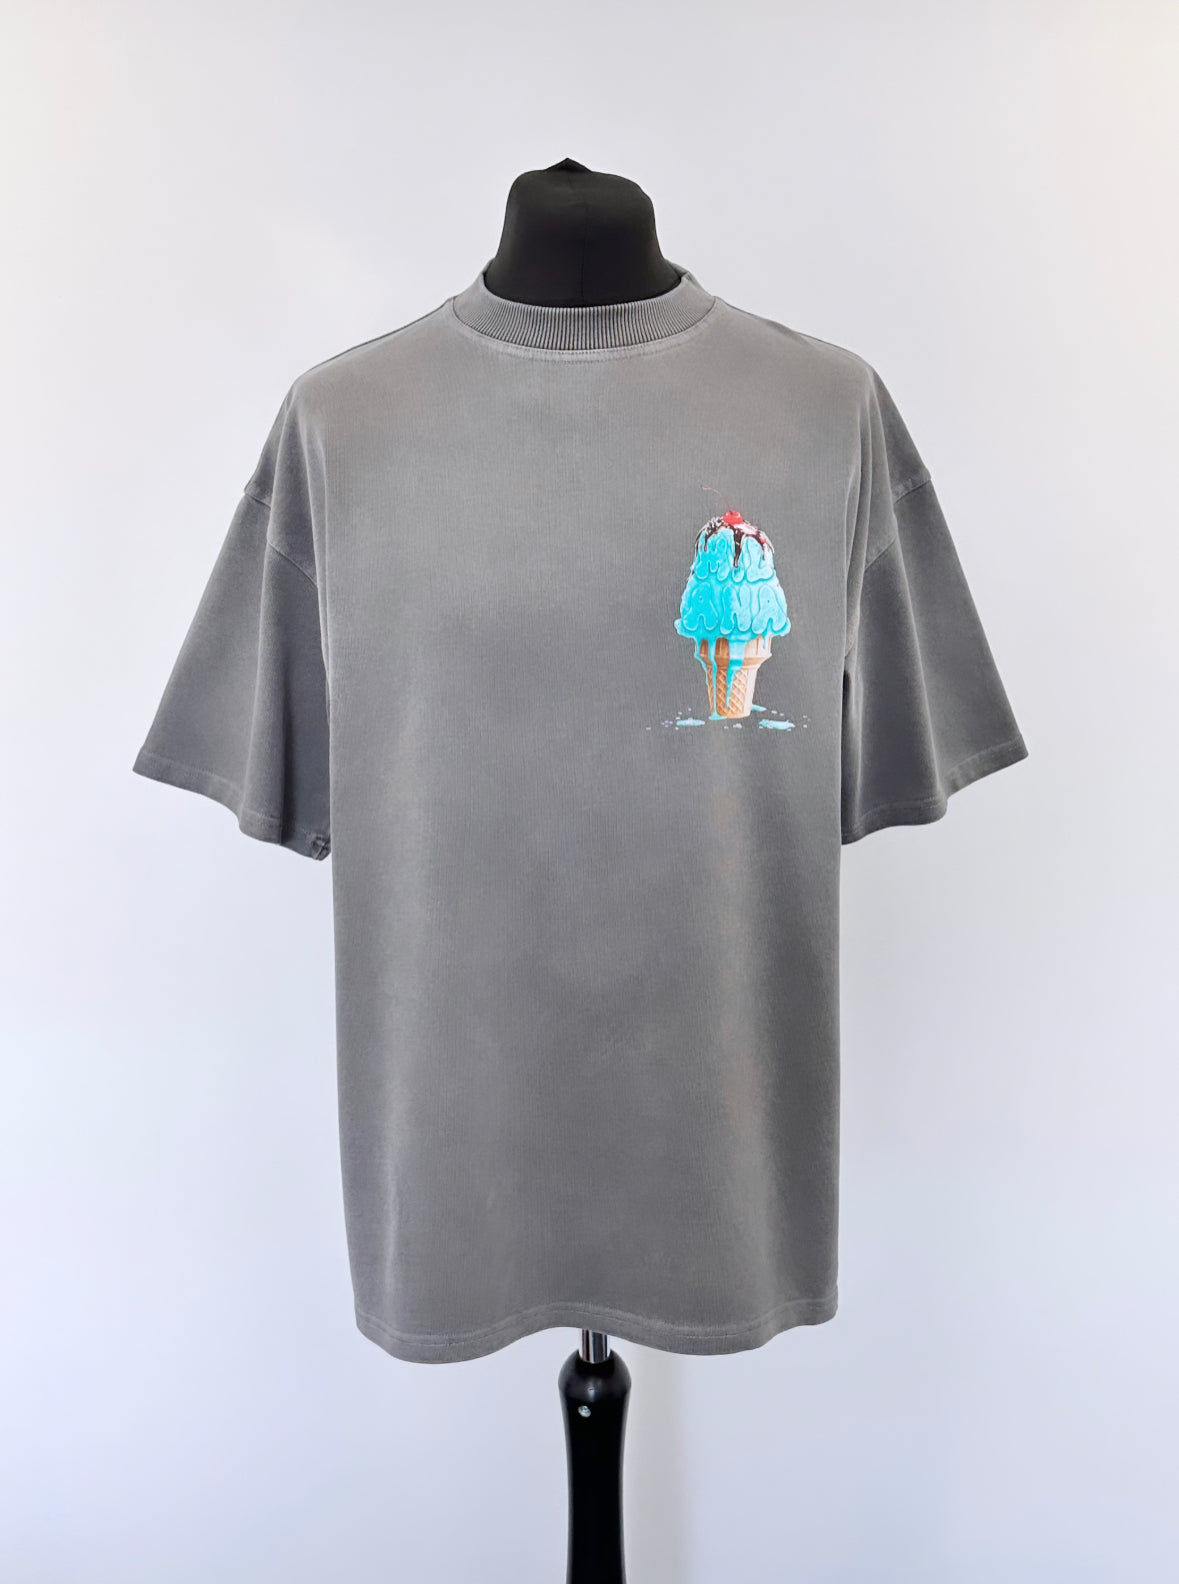 Washed Charcoal Heavyweight Ice Cream T-shirt.